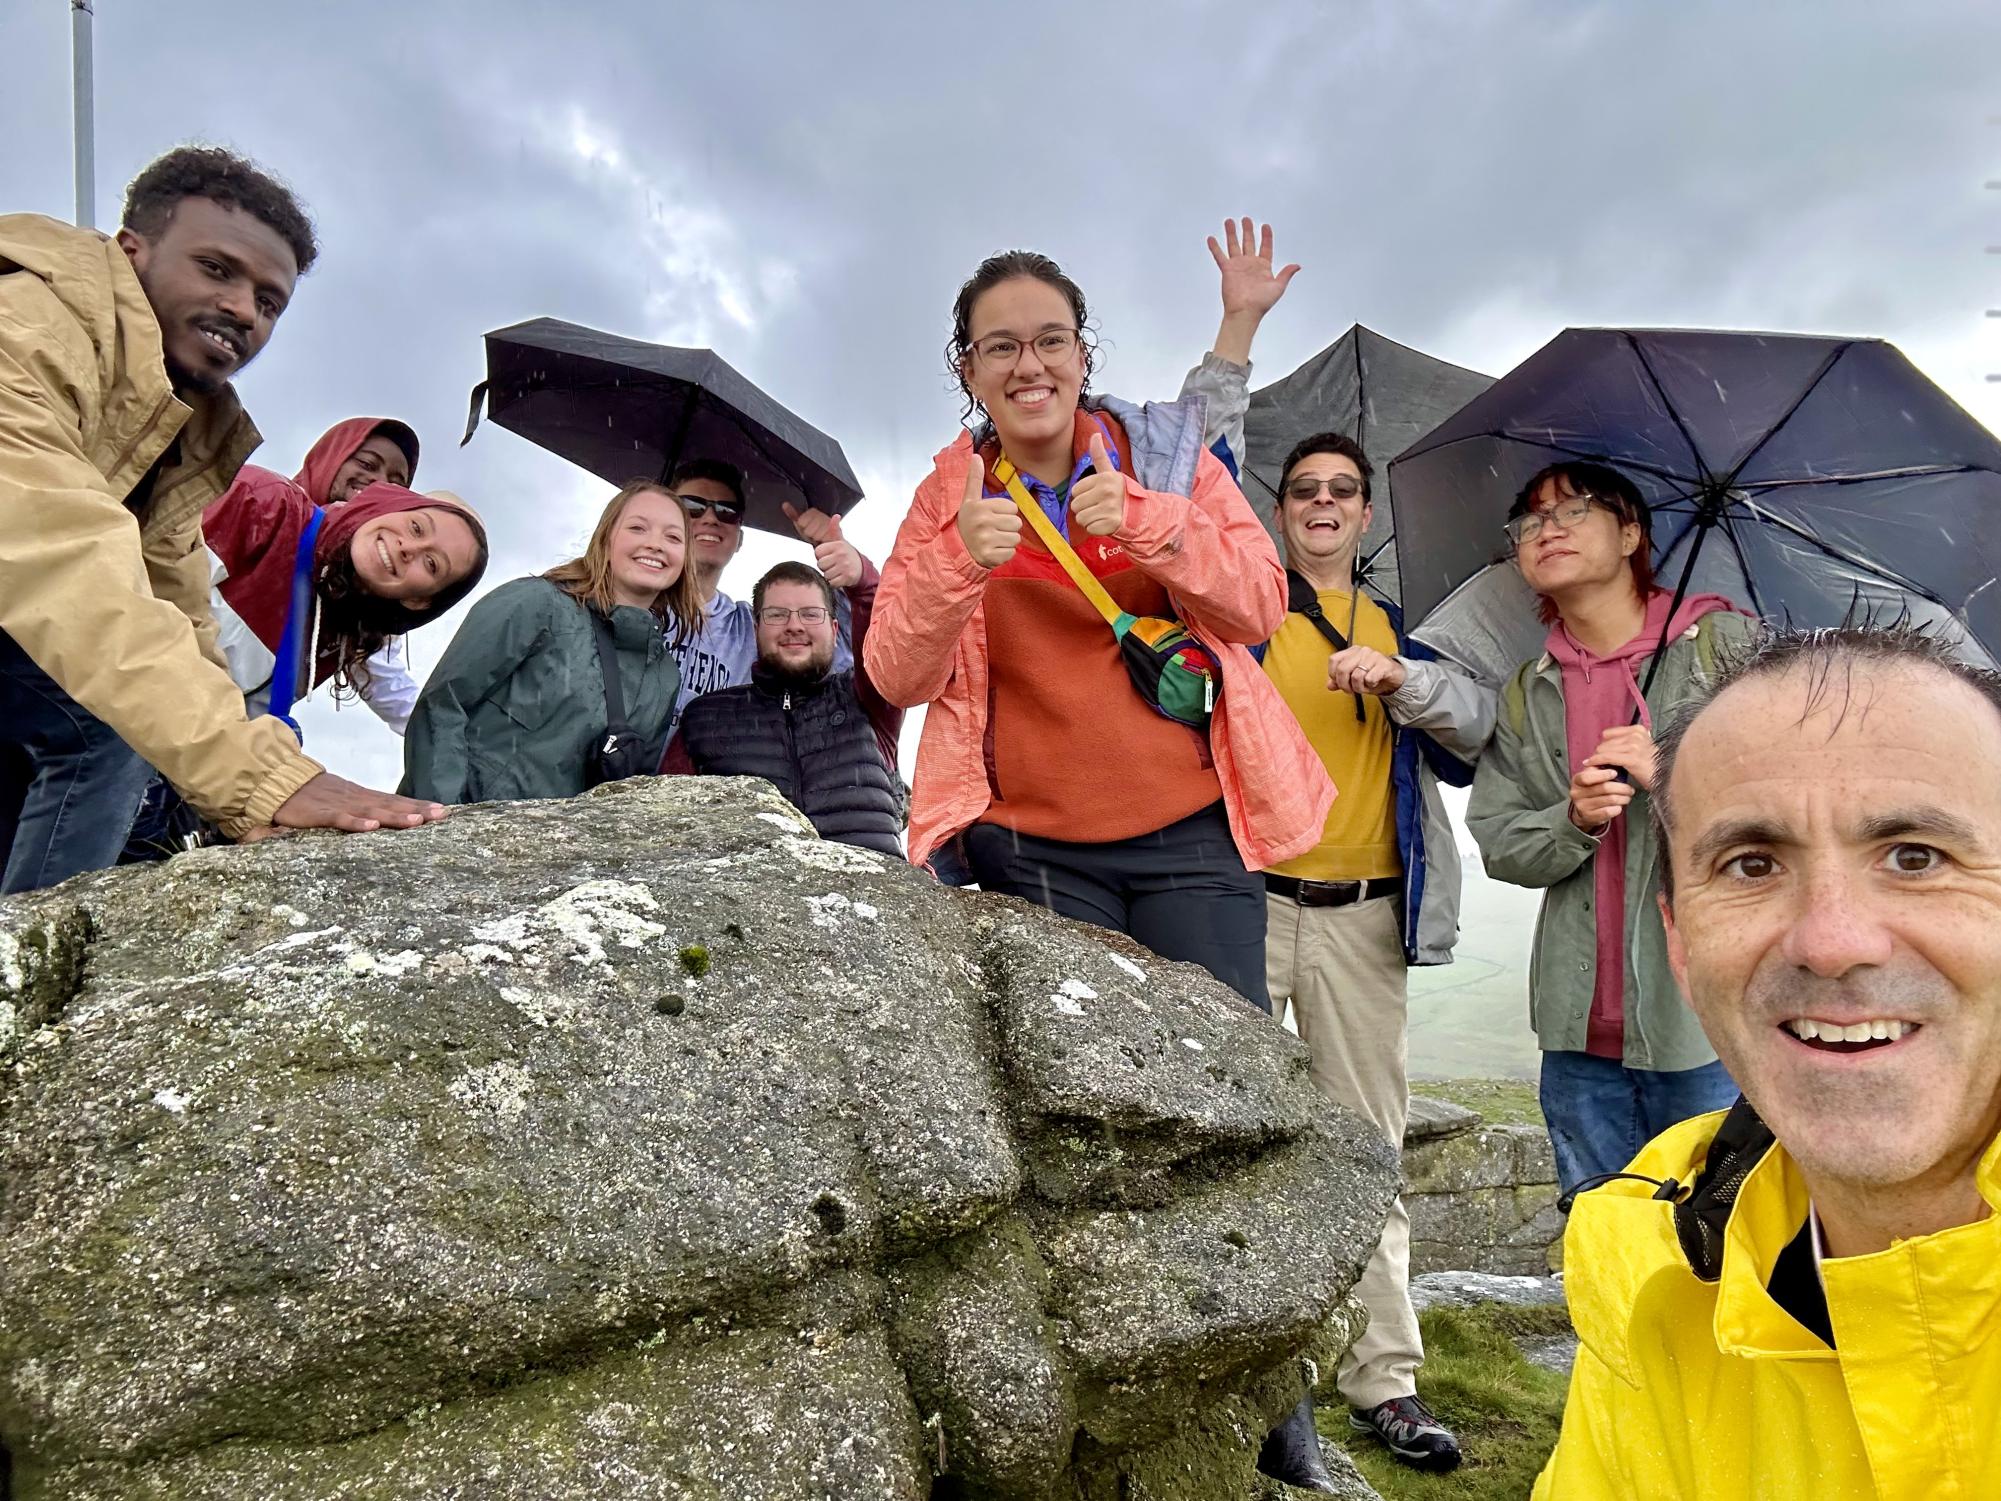 Luther Notts on their hike in Dartmoor National Park. Photo courtesy of Dr. Spencer Martin.